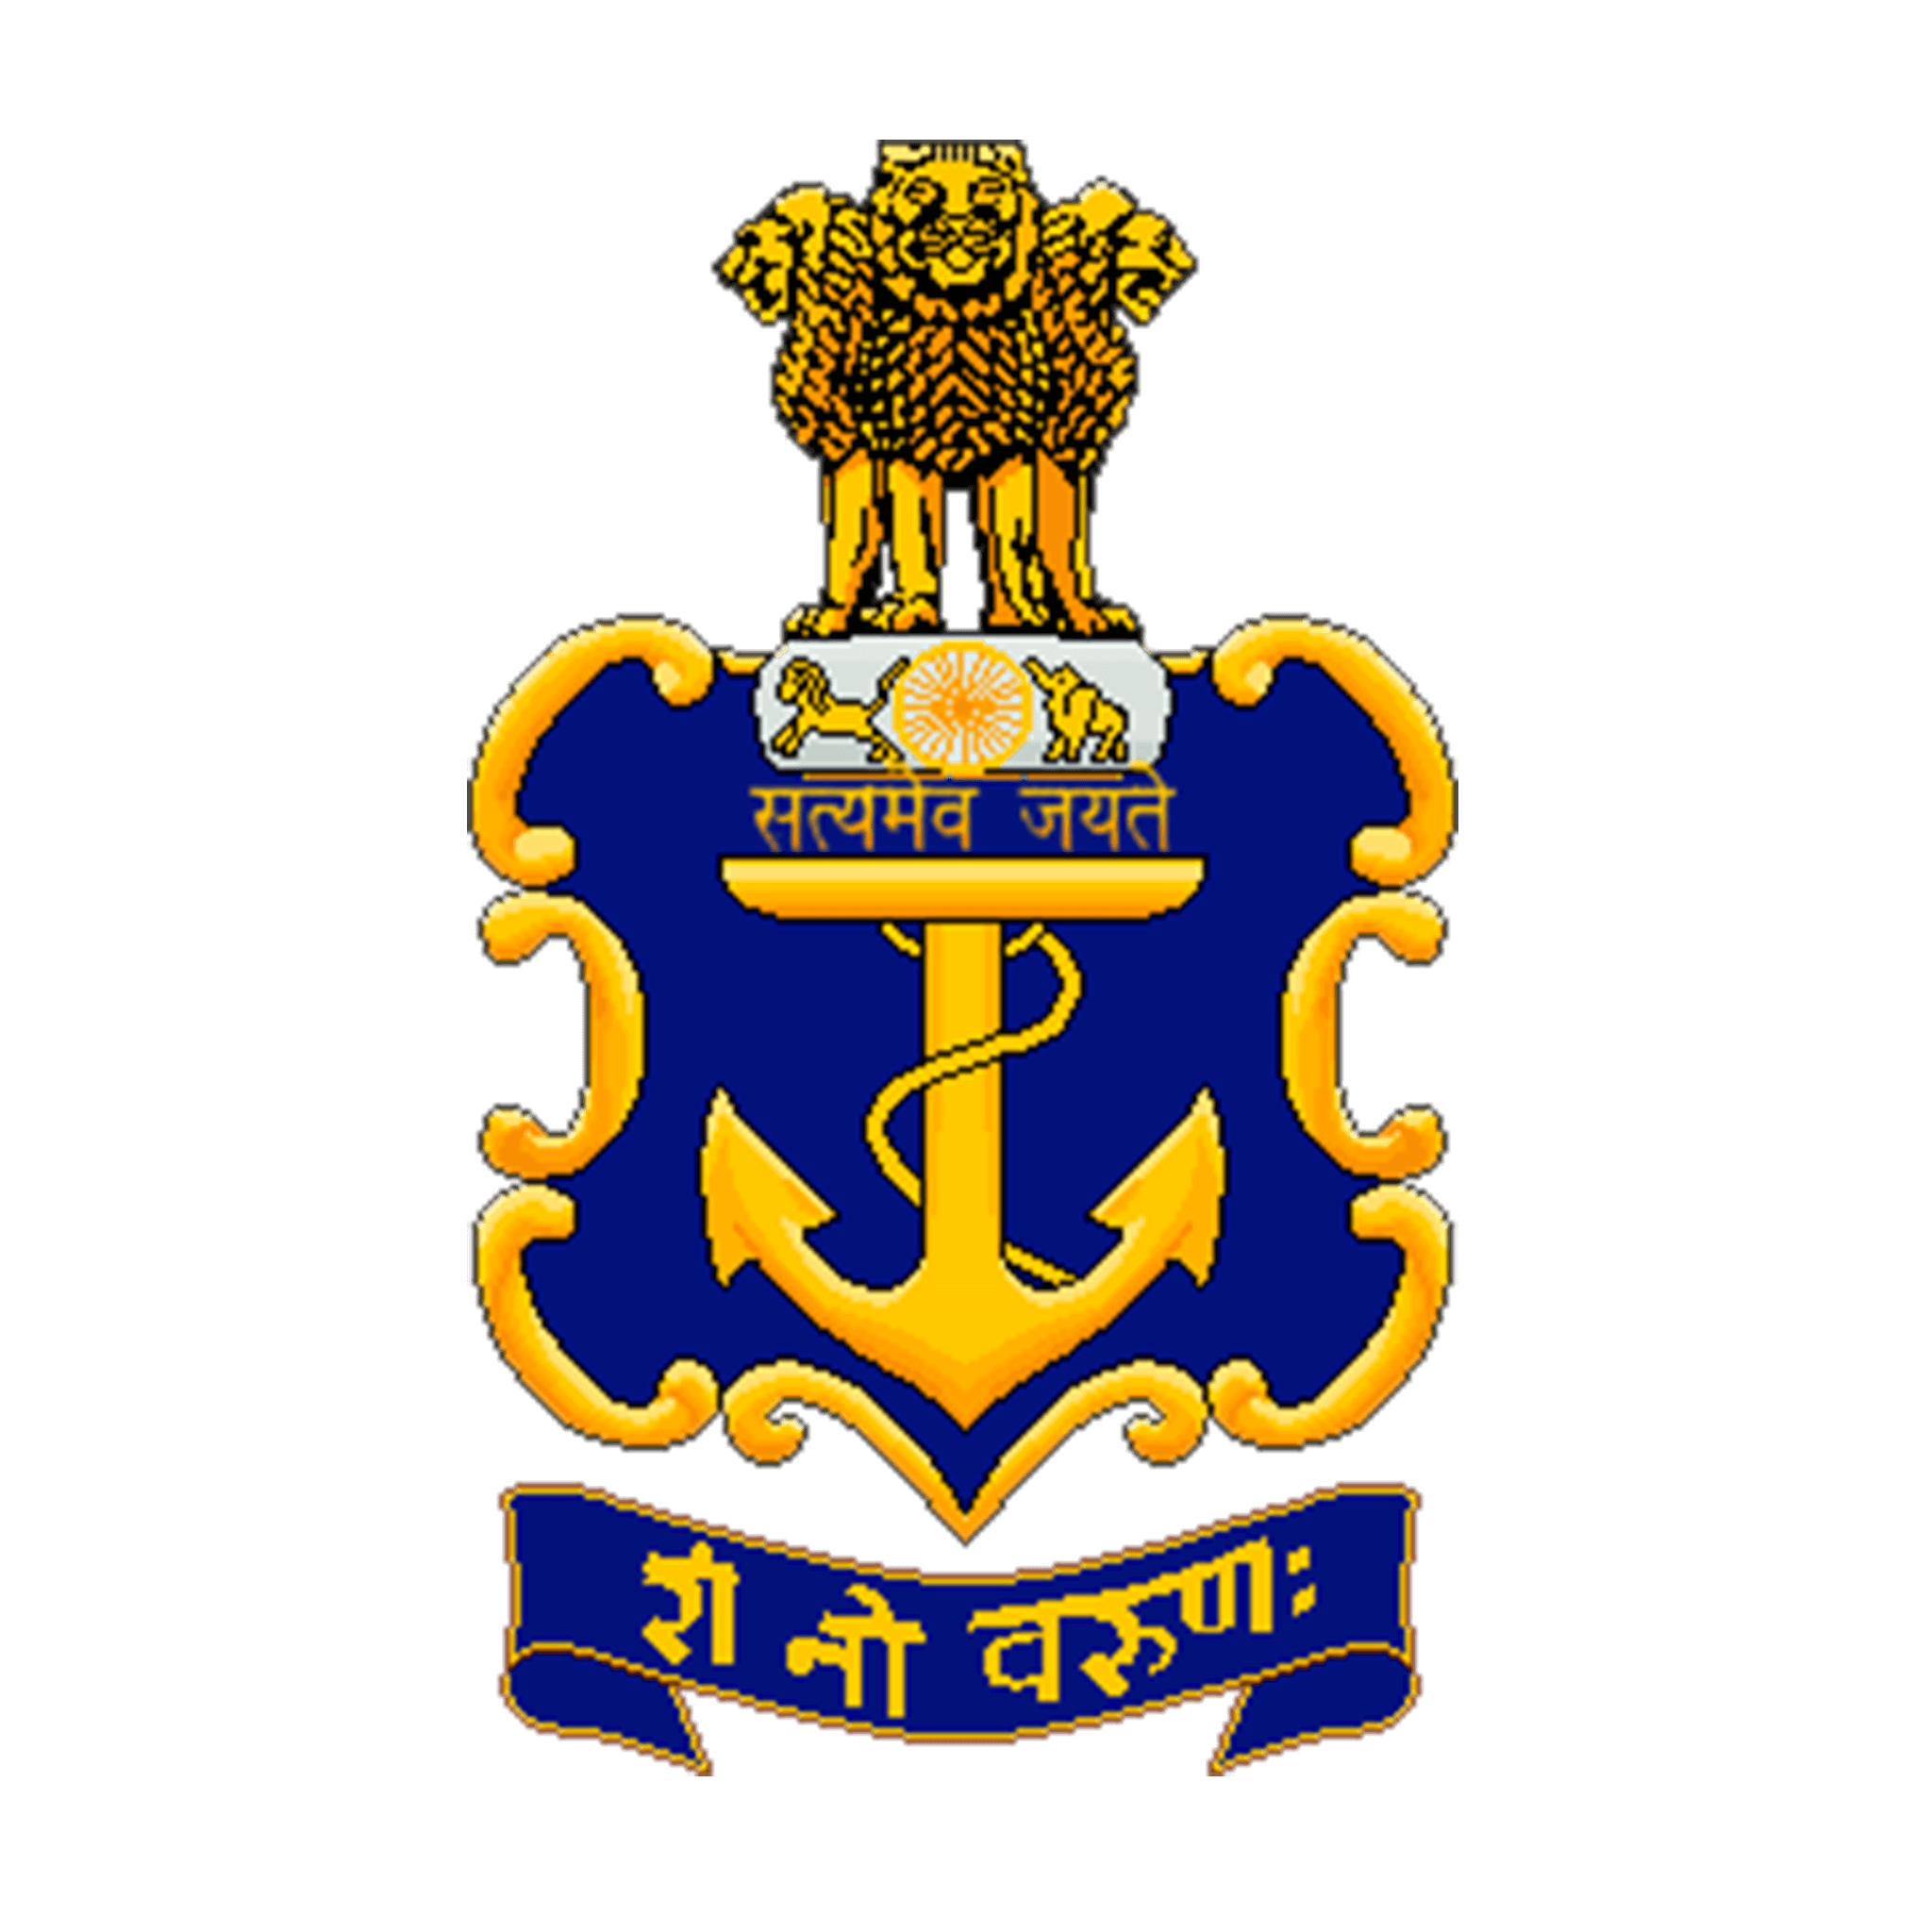 Indian Navy Logo PNG Image Free Download searchpng.com